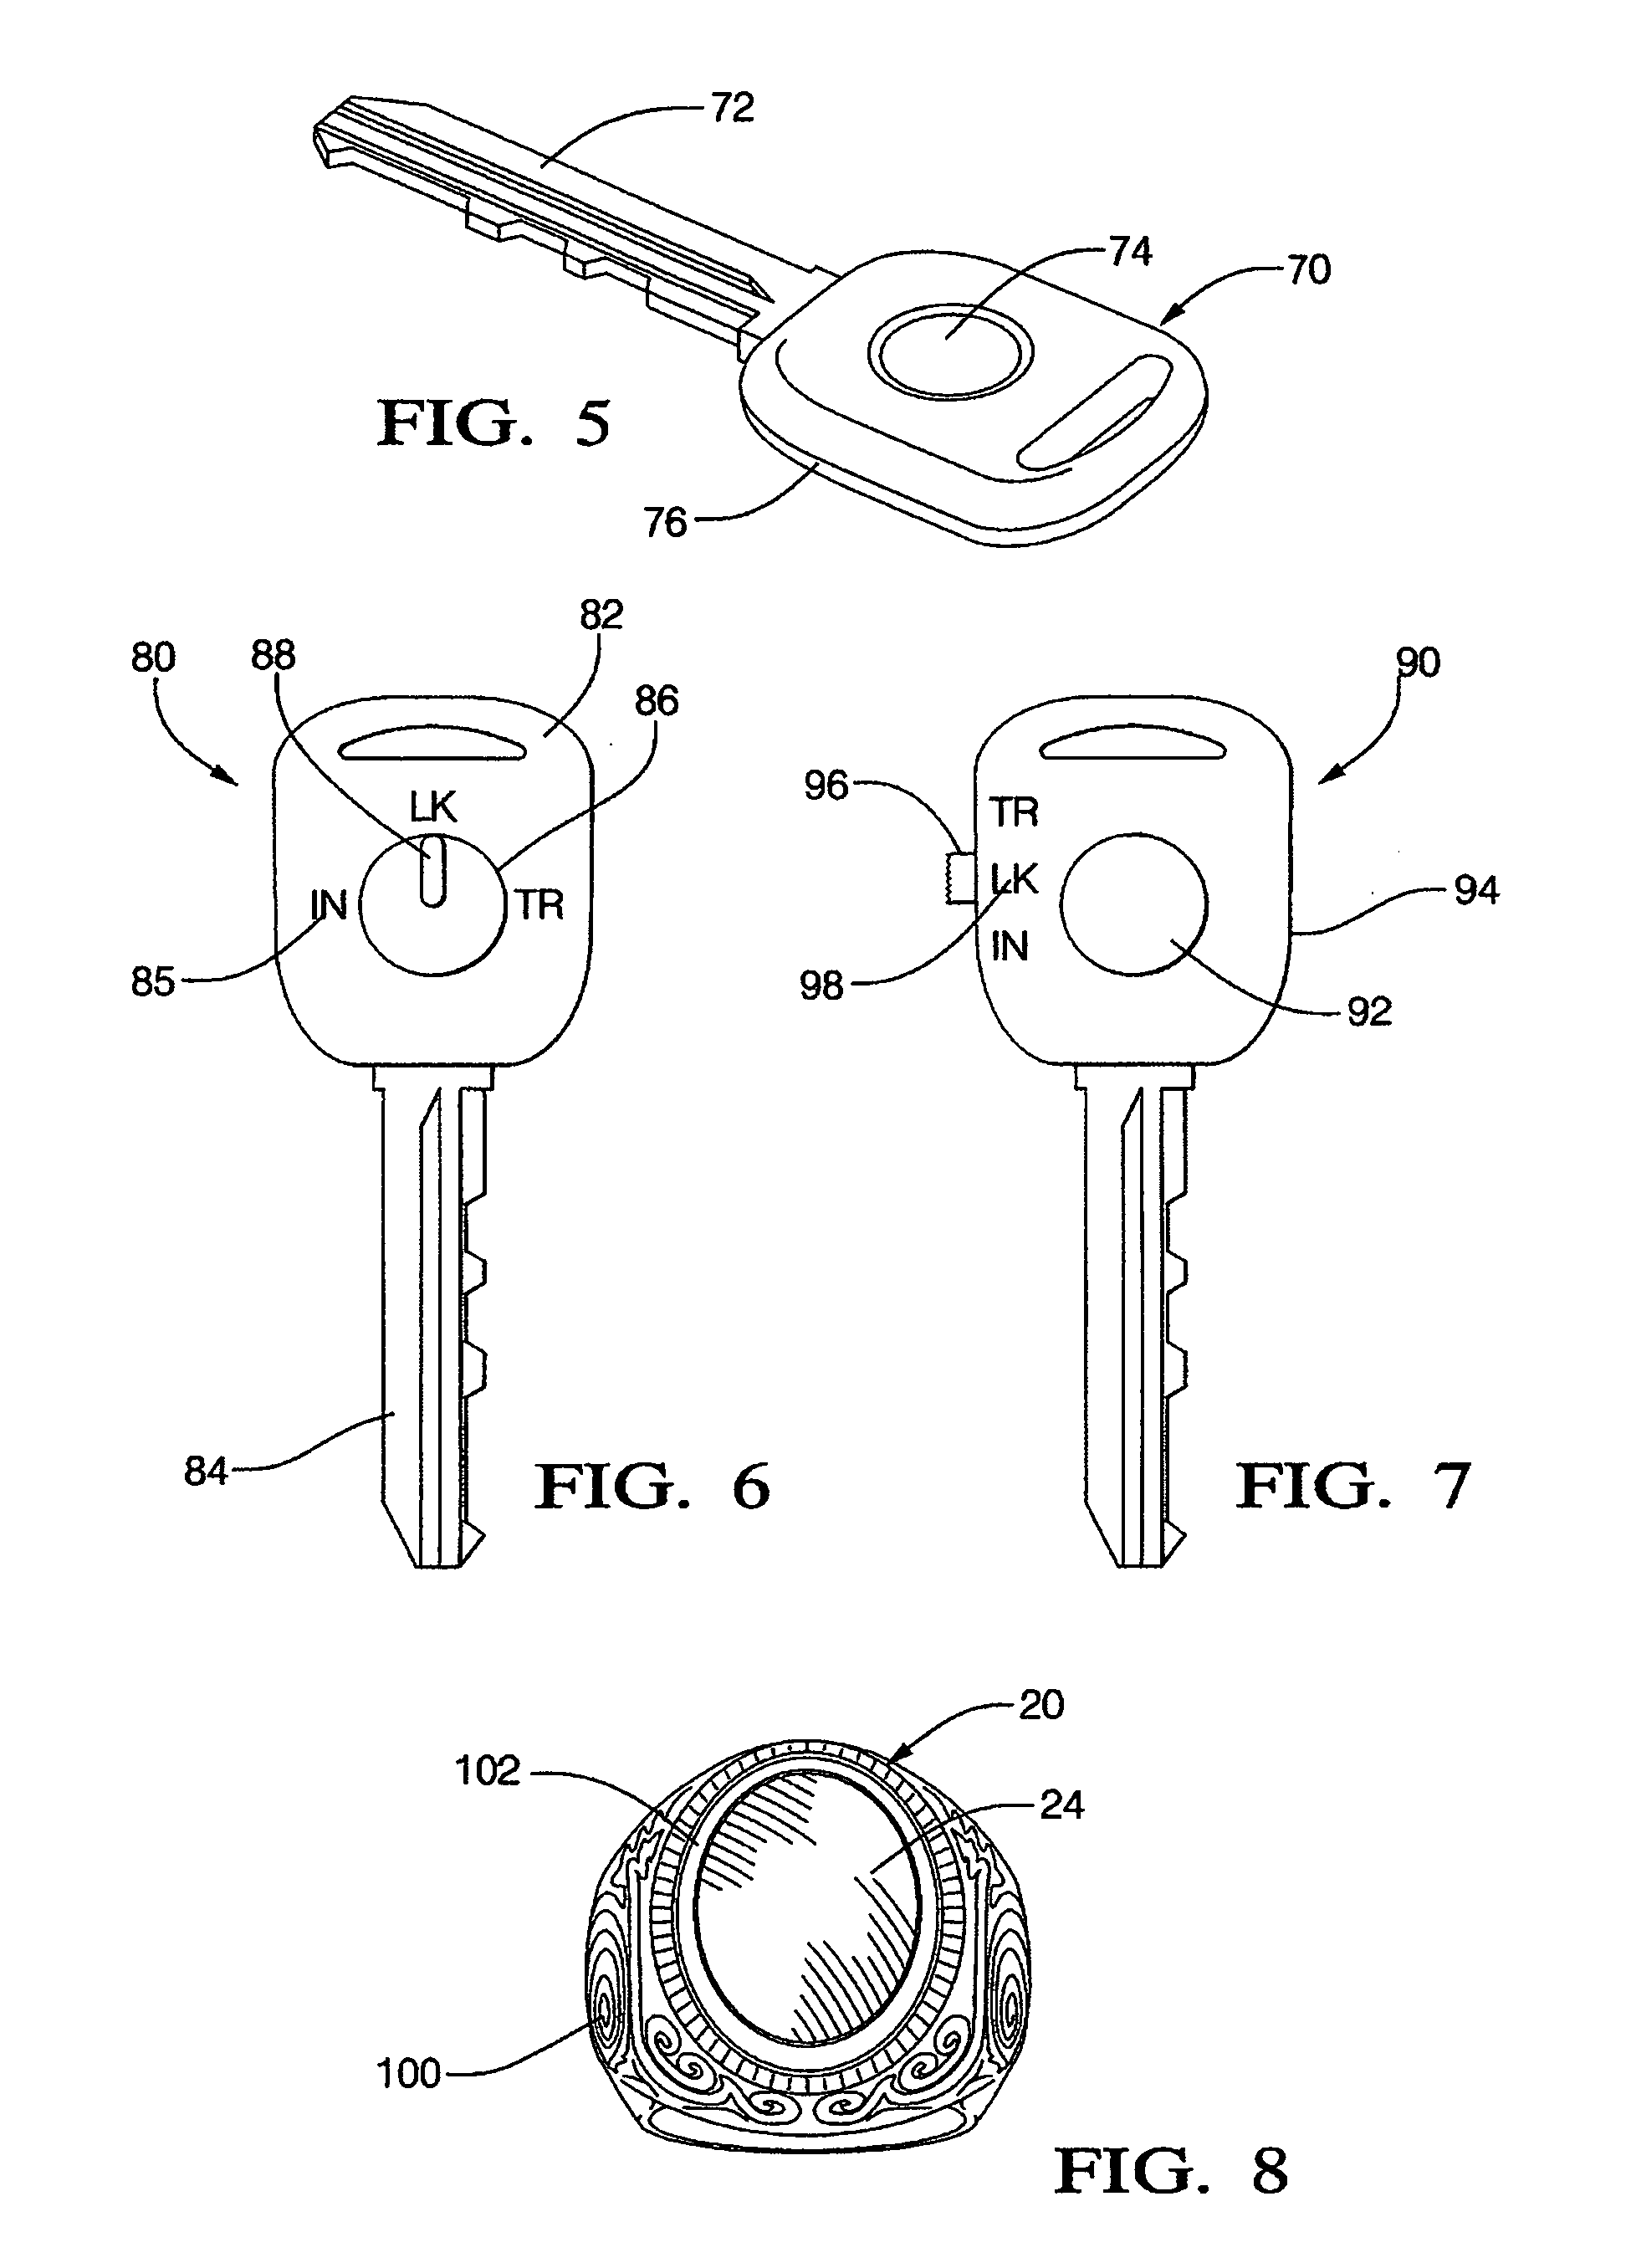 Mini fob with improved human machine interface